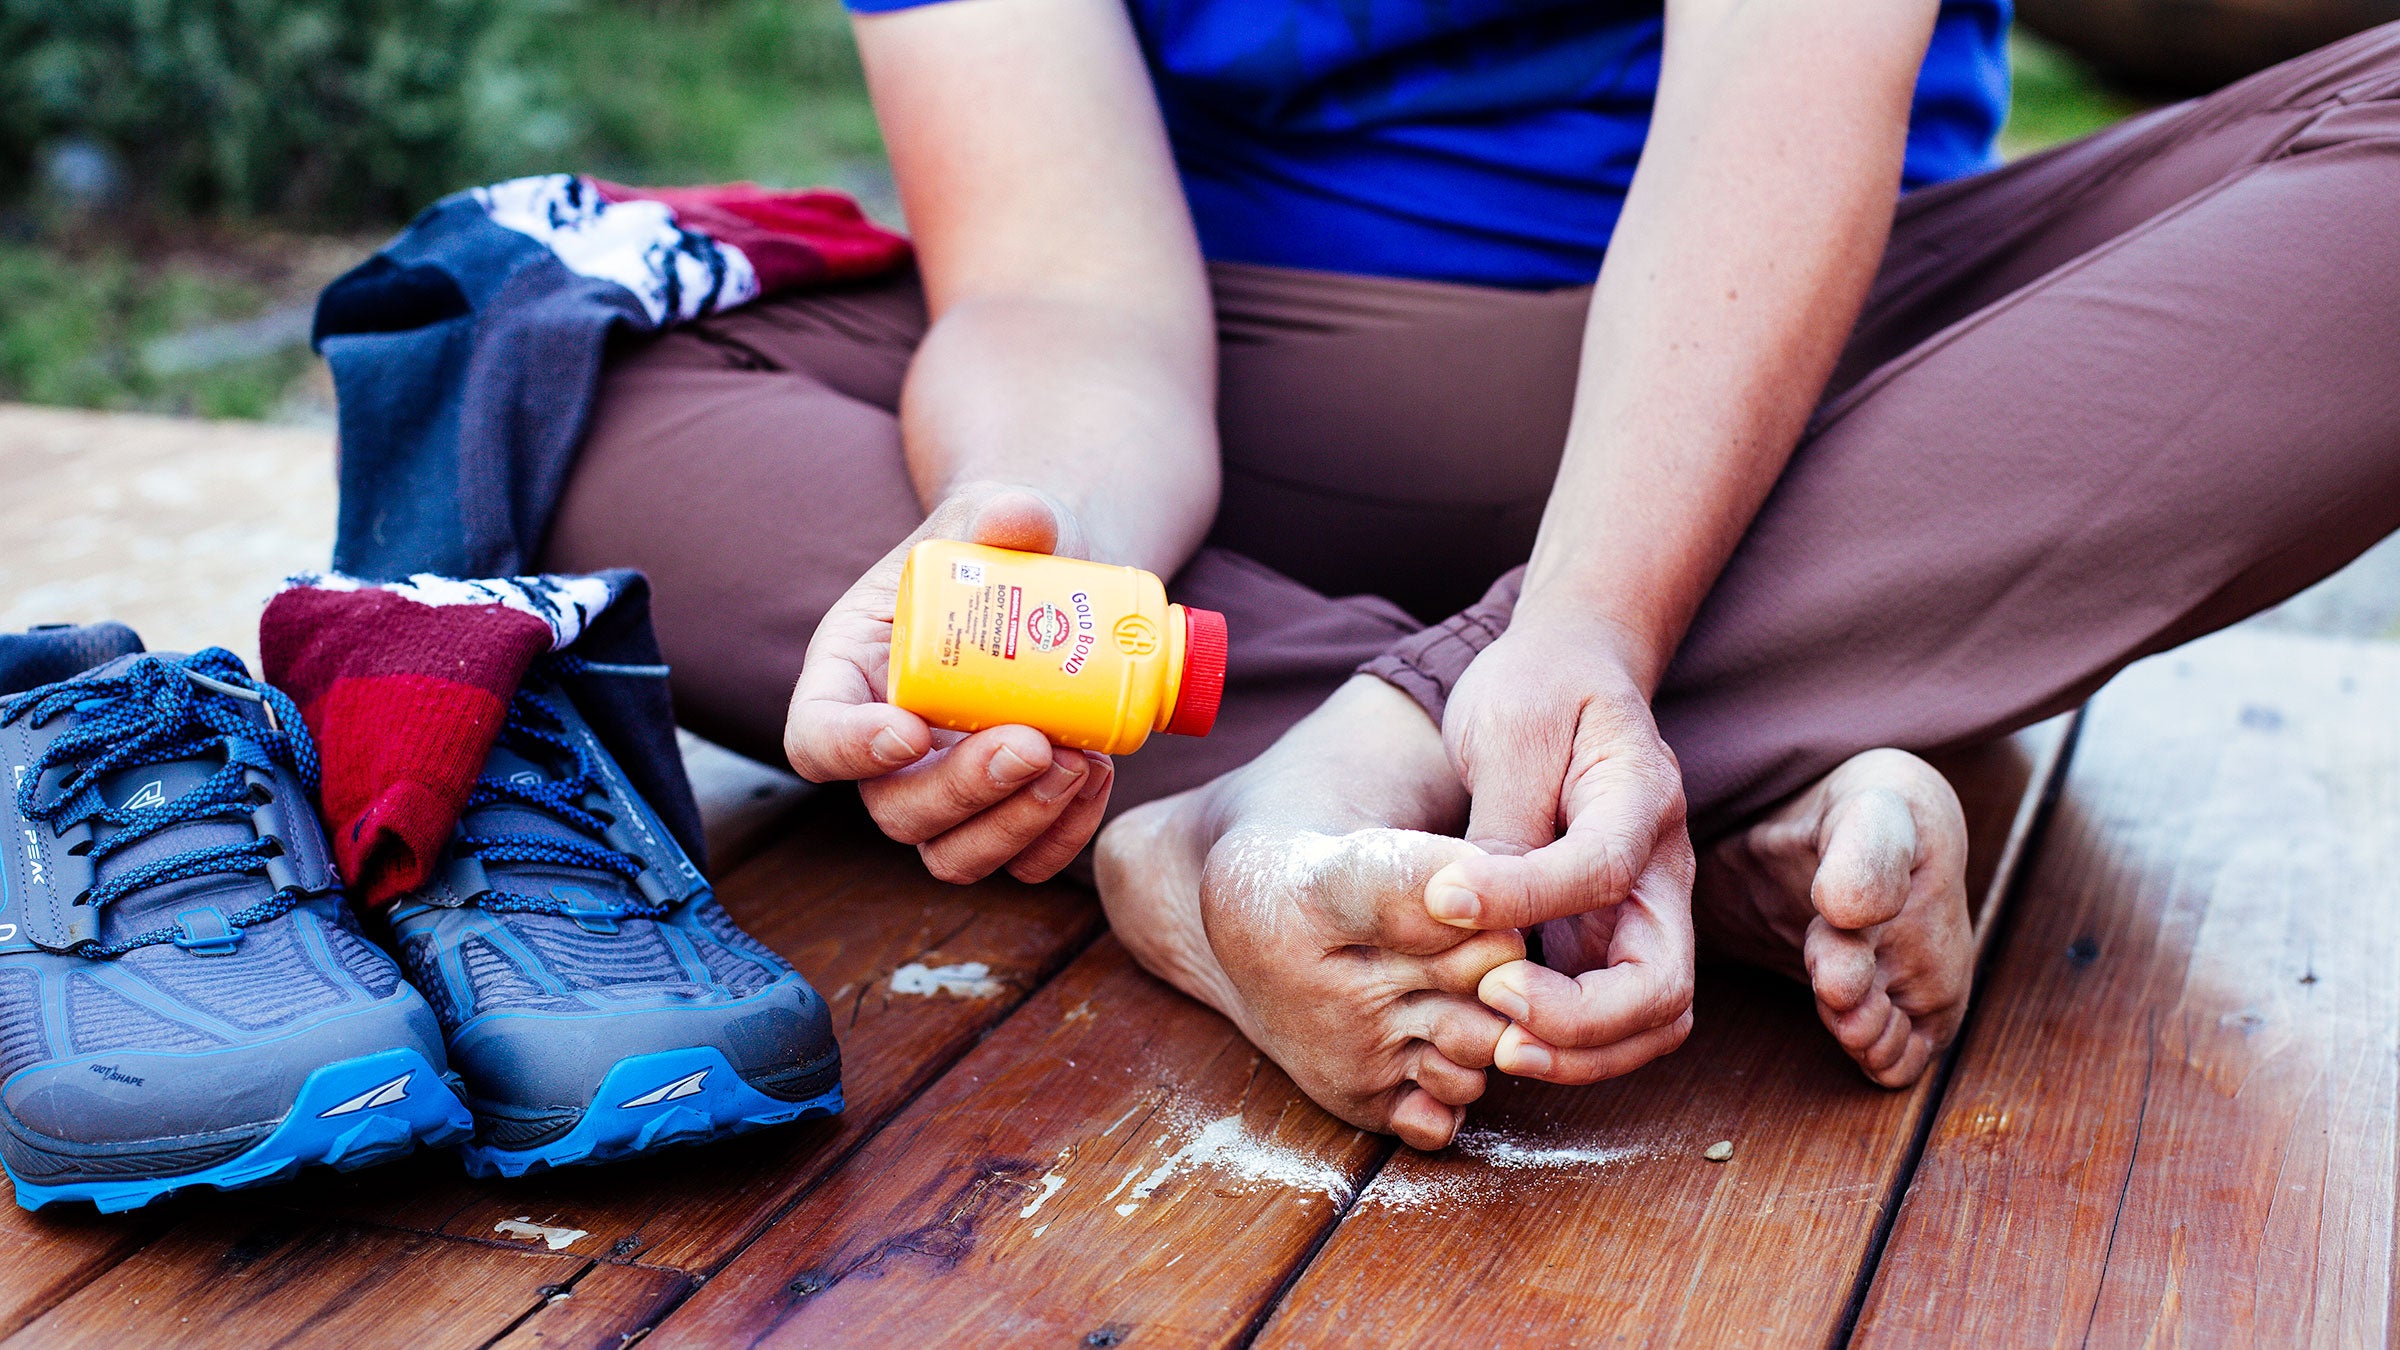 Blister Prevention for Running, Hiking, Walking and More!